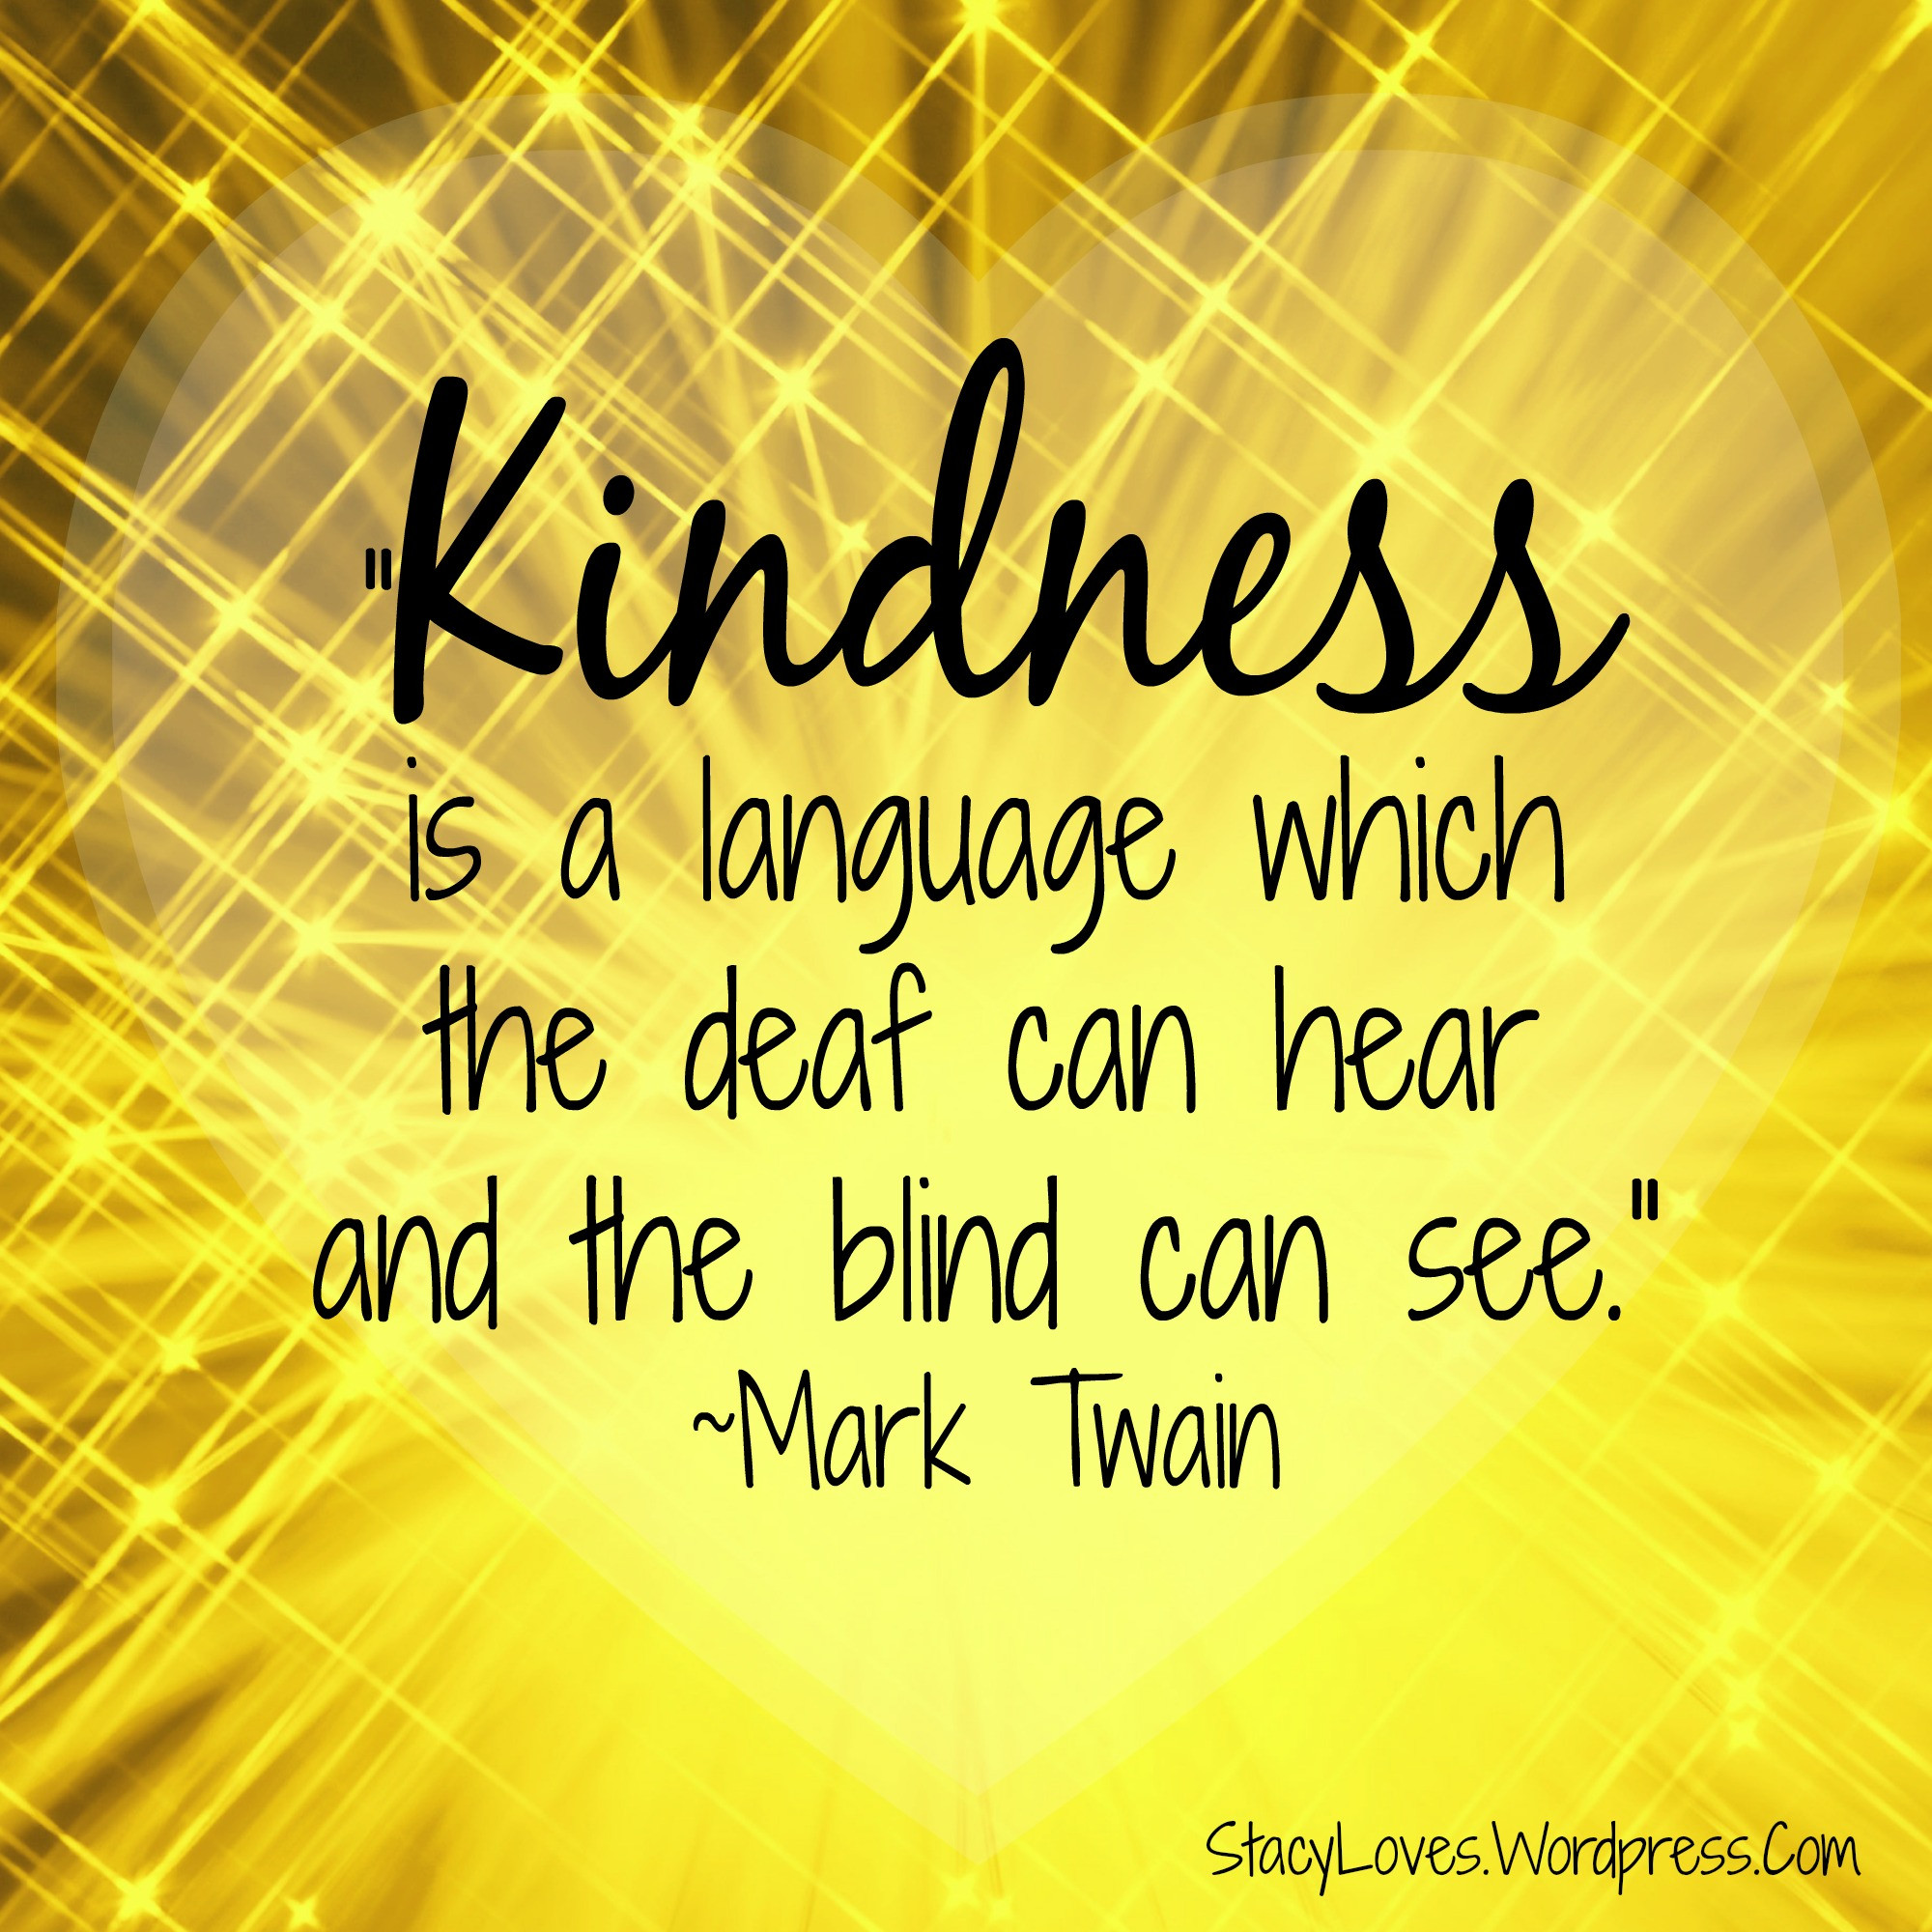 Act Of Kindness Quotes
 Kindness Quotes